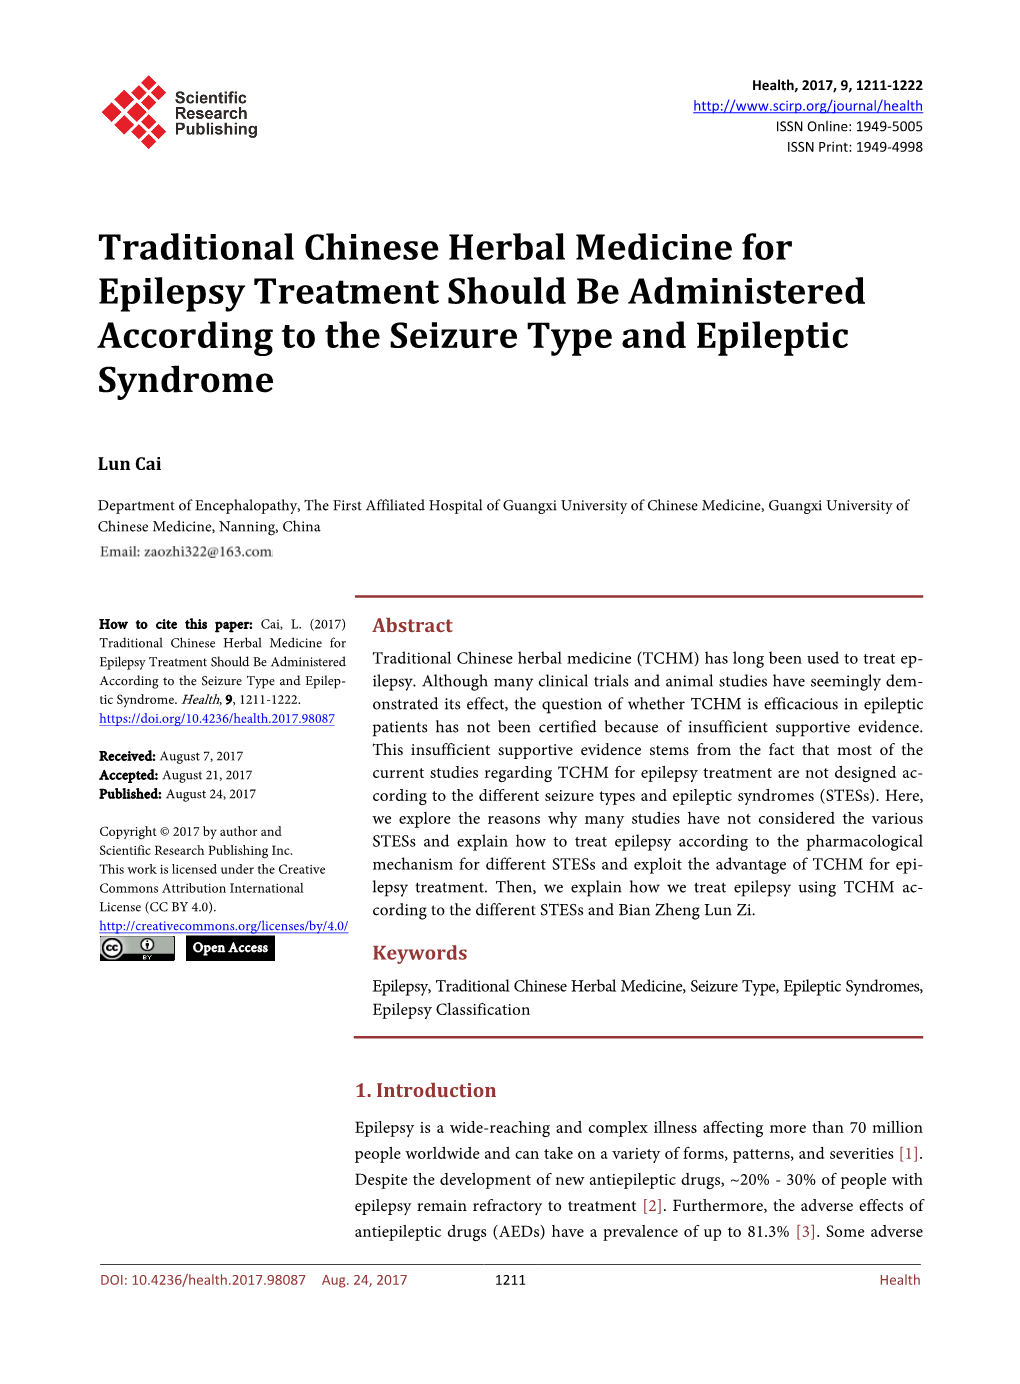 Traditional Chinese Herbal Medicine for Epilepsy Treatment Should Be Administered According to the Seizure Type and Epileptic Syndrome